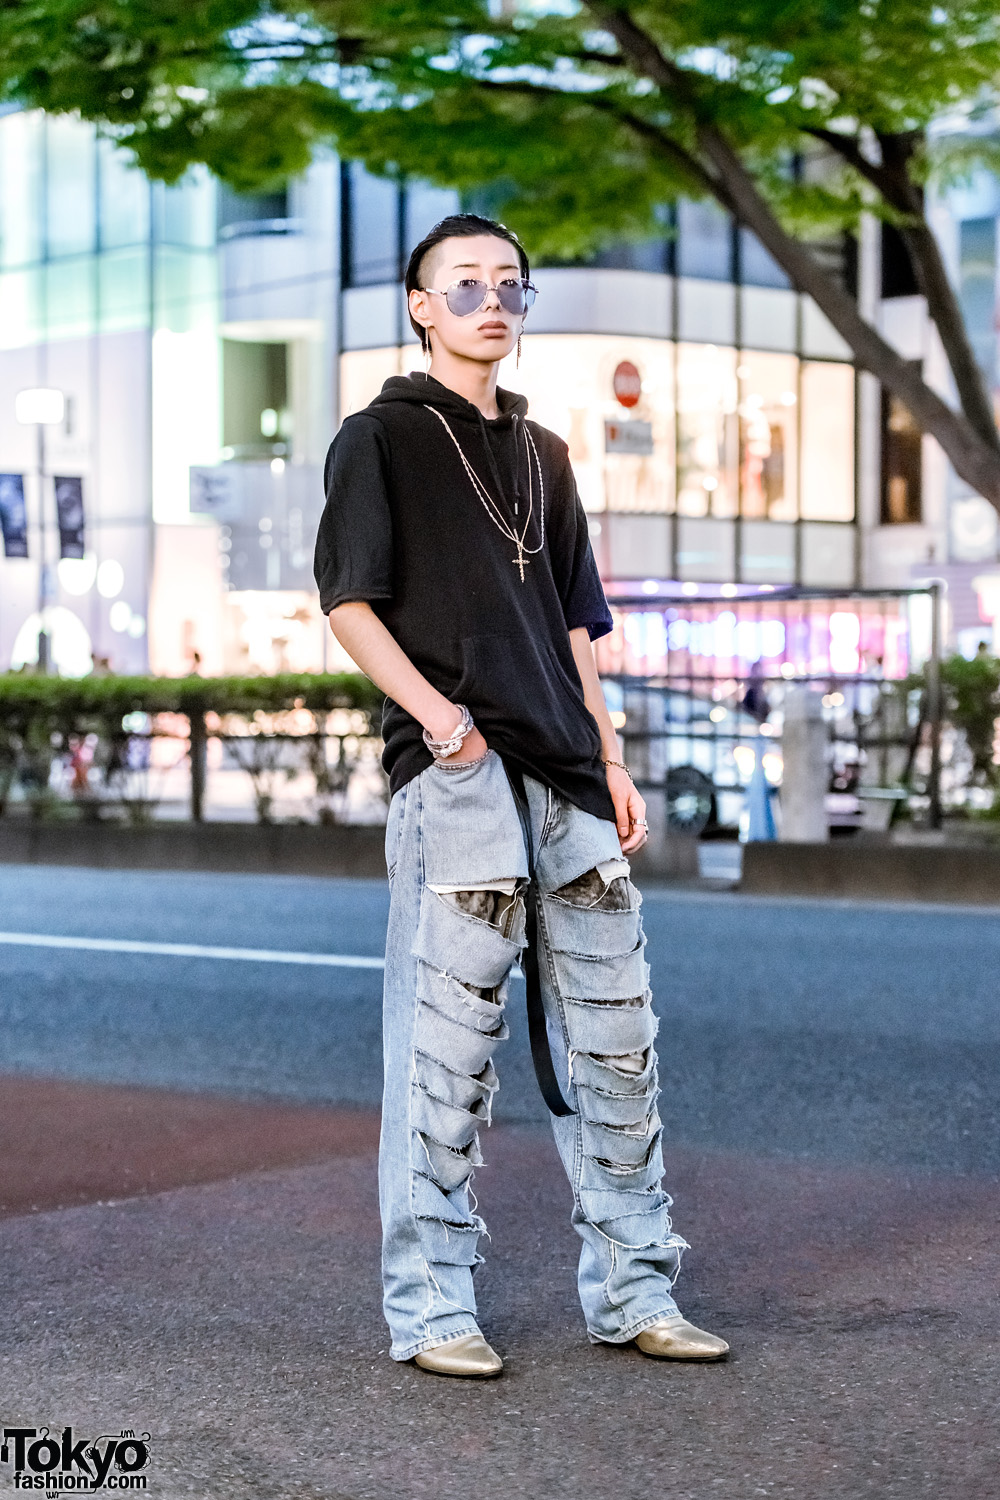 Japanese Male Model in Harajuku w/ Black Hoodie, Shredded Jeans & Gold Boots